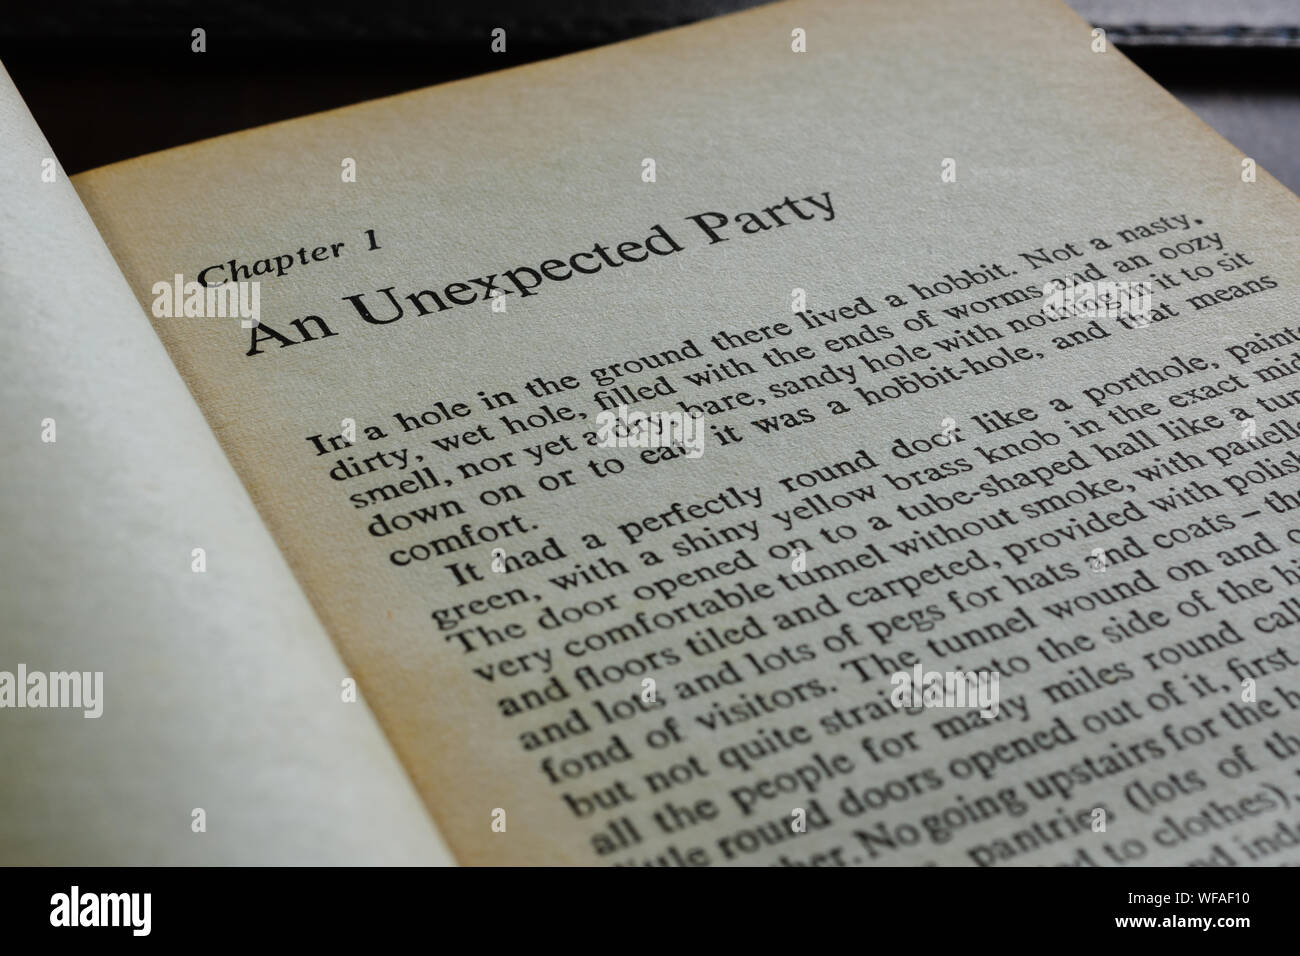 A vintage paperback showing the opening chapter of The Hobbit an unexpected party written by J.R.R. Tolkien in 1937 Stock Photo